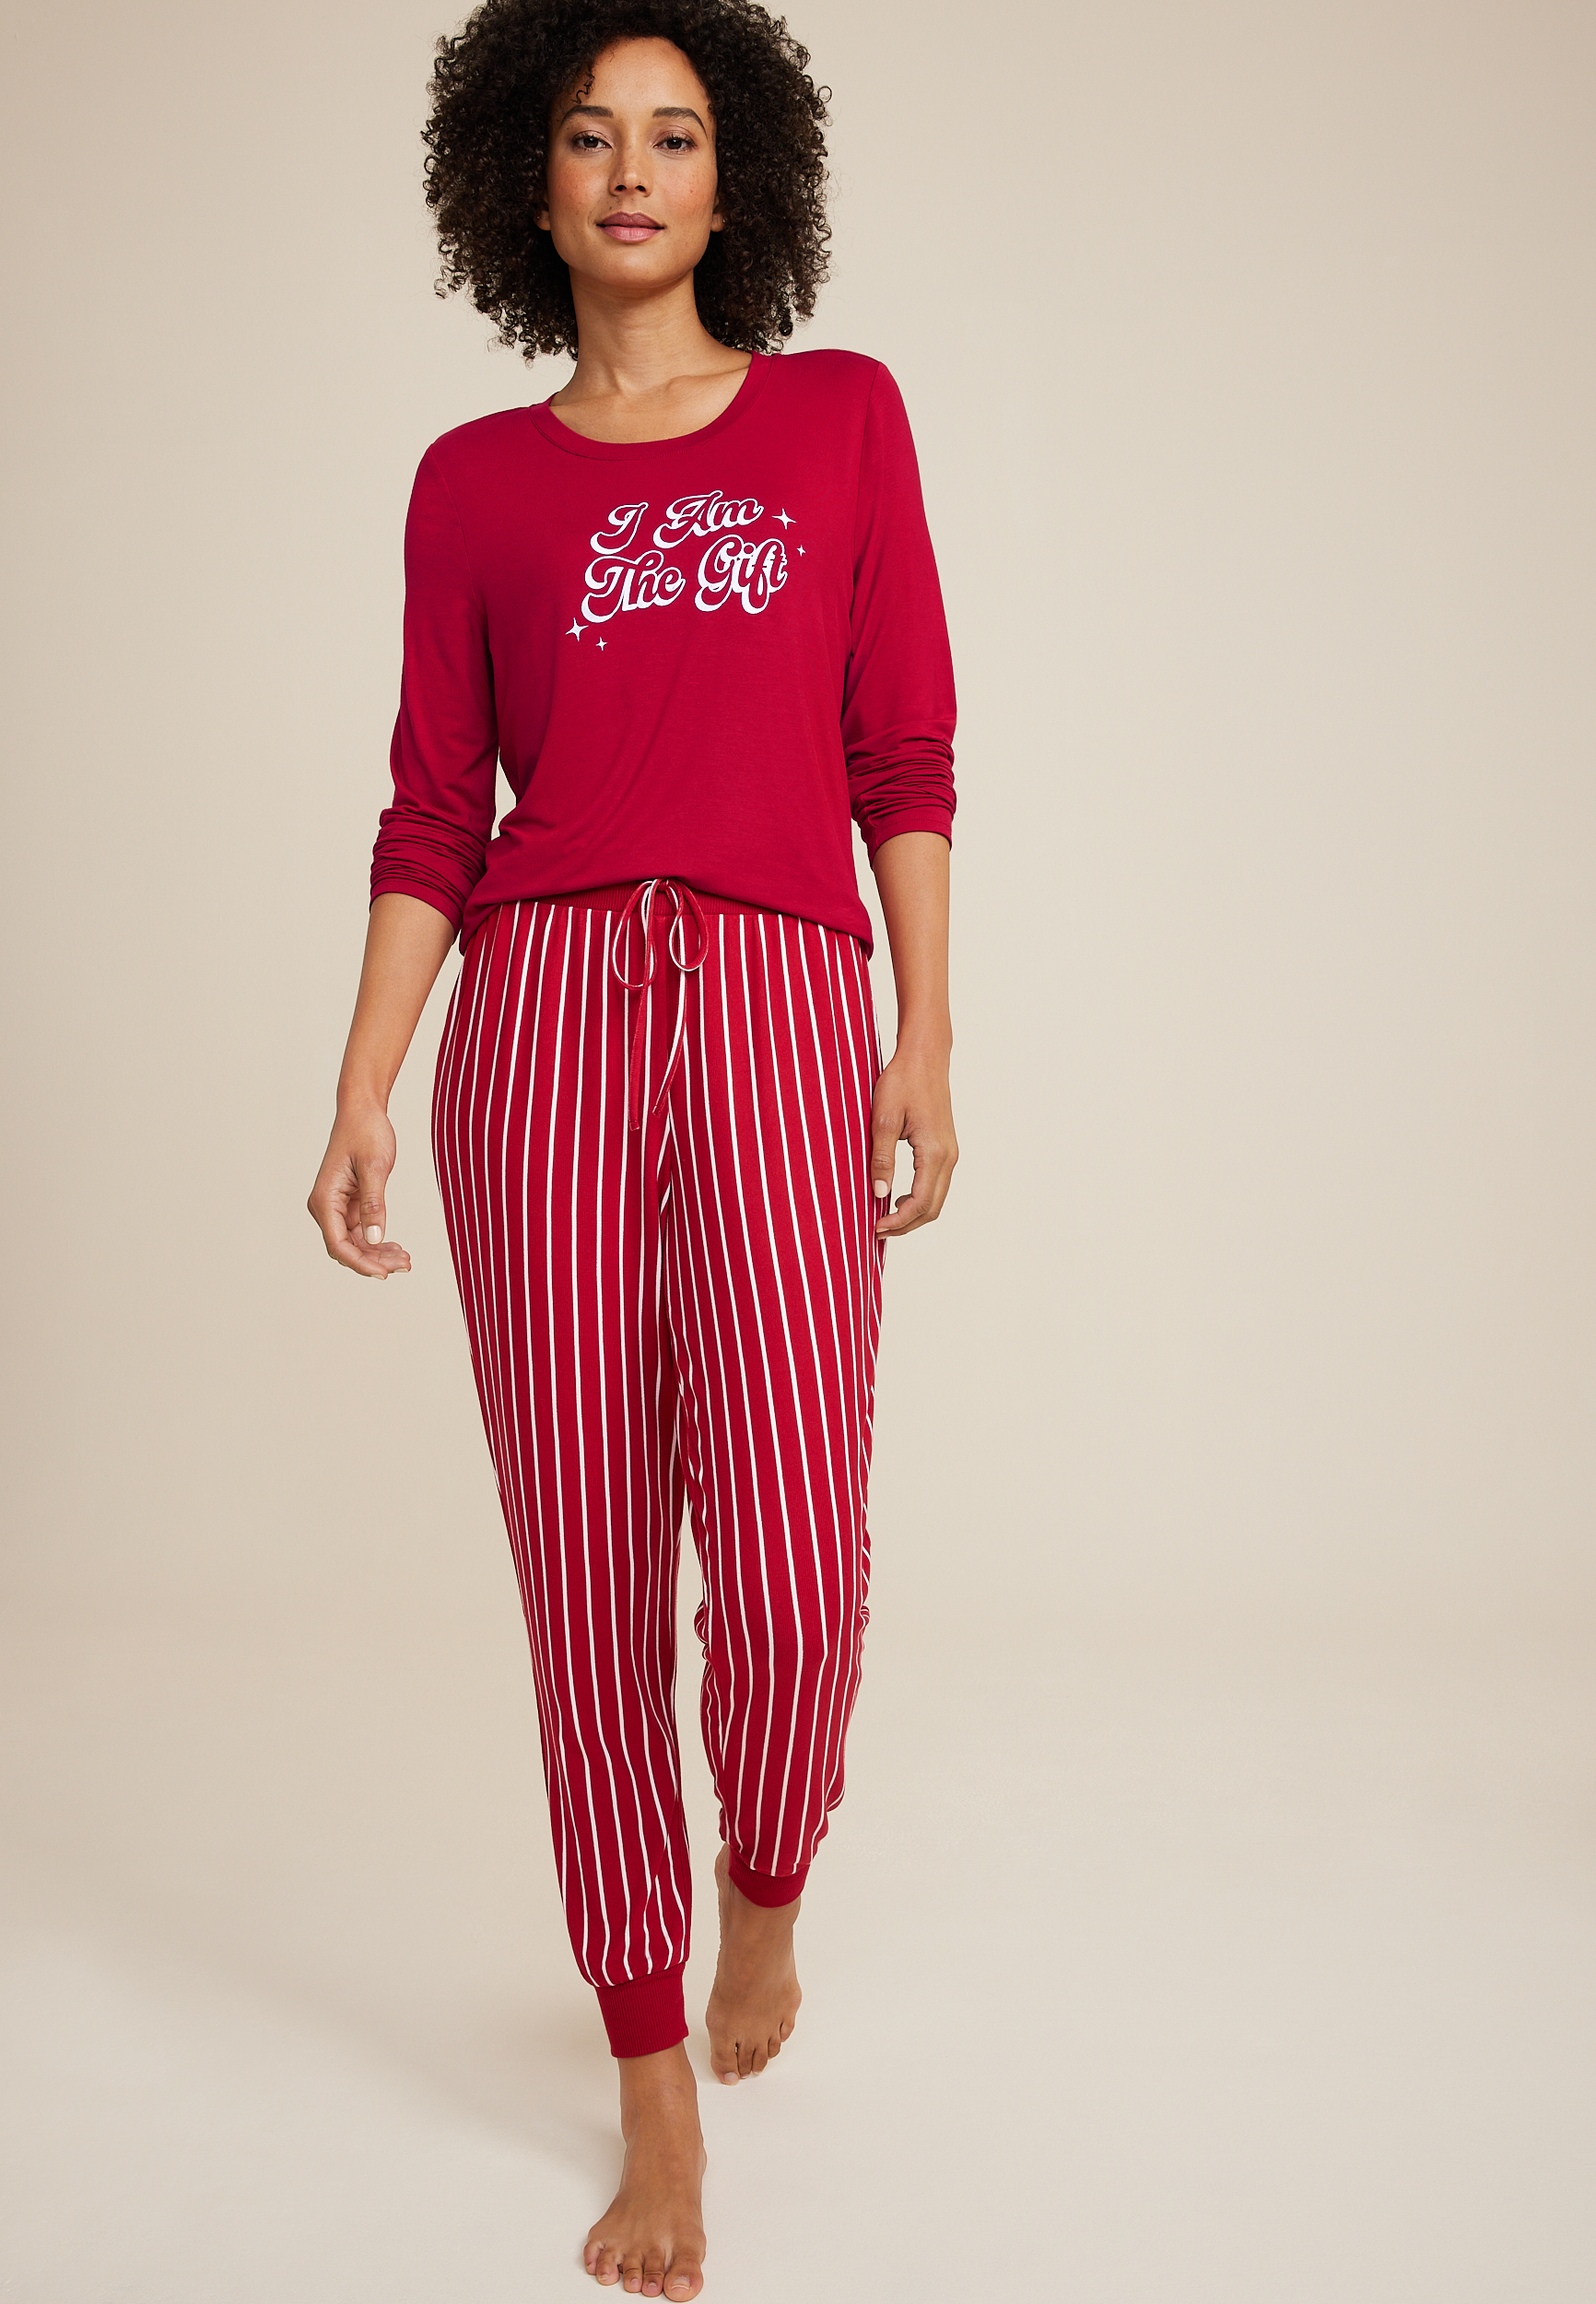 Holiday Graphic Tee And Jogger Pajama Set | maurices